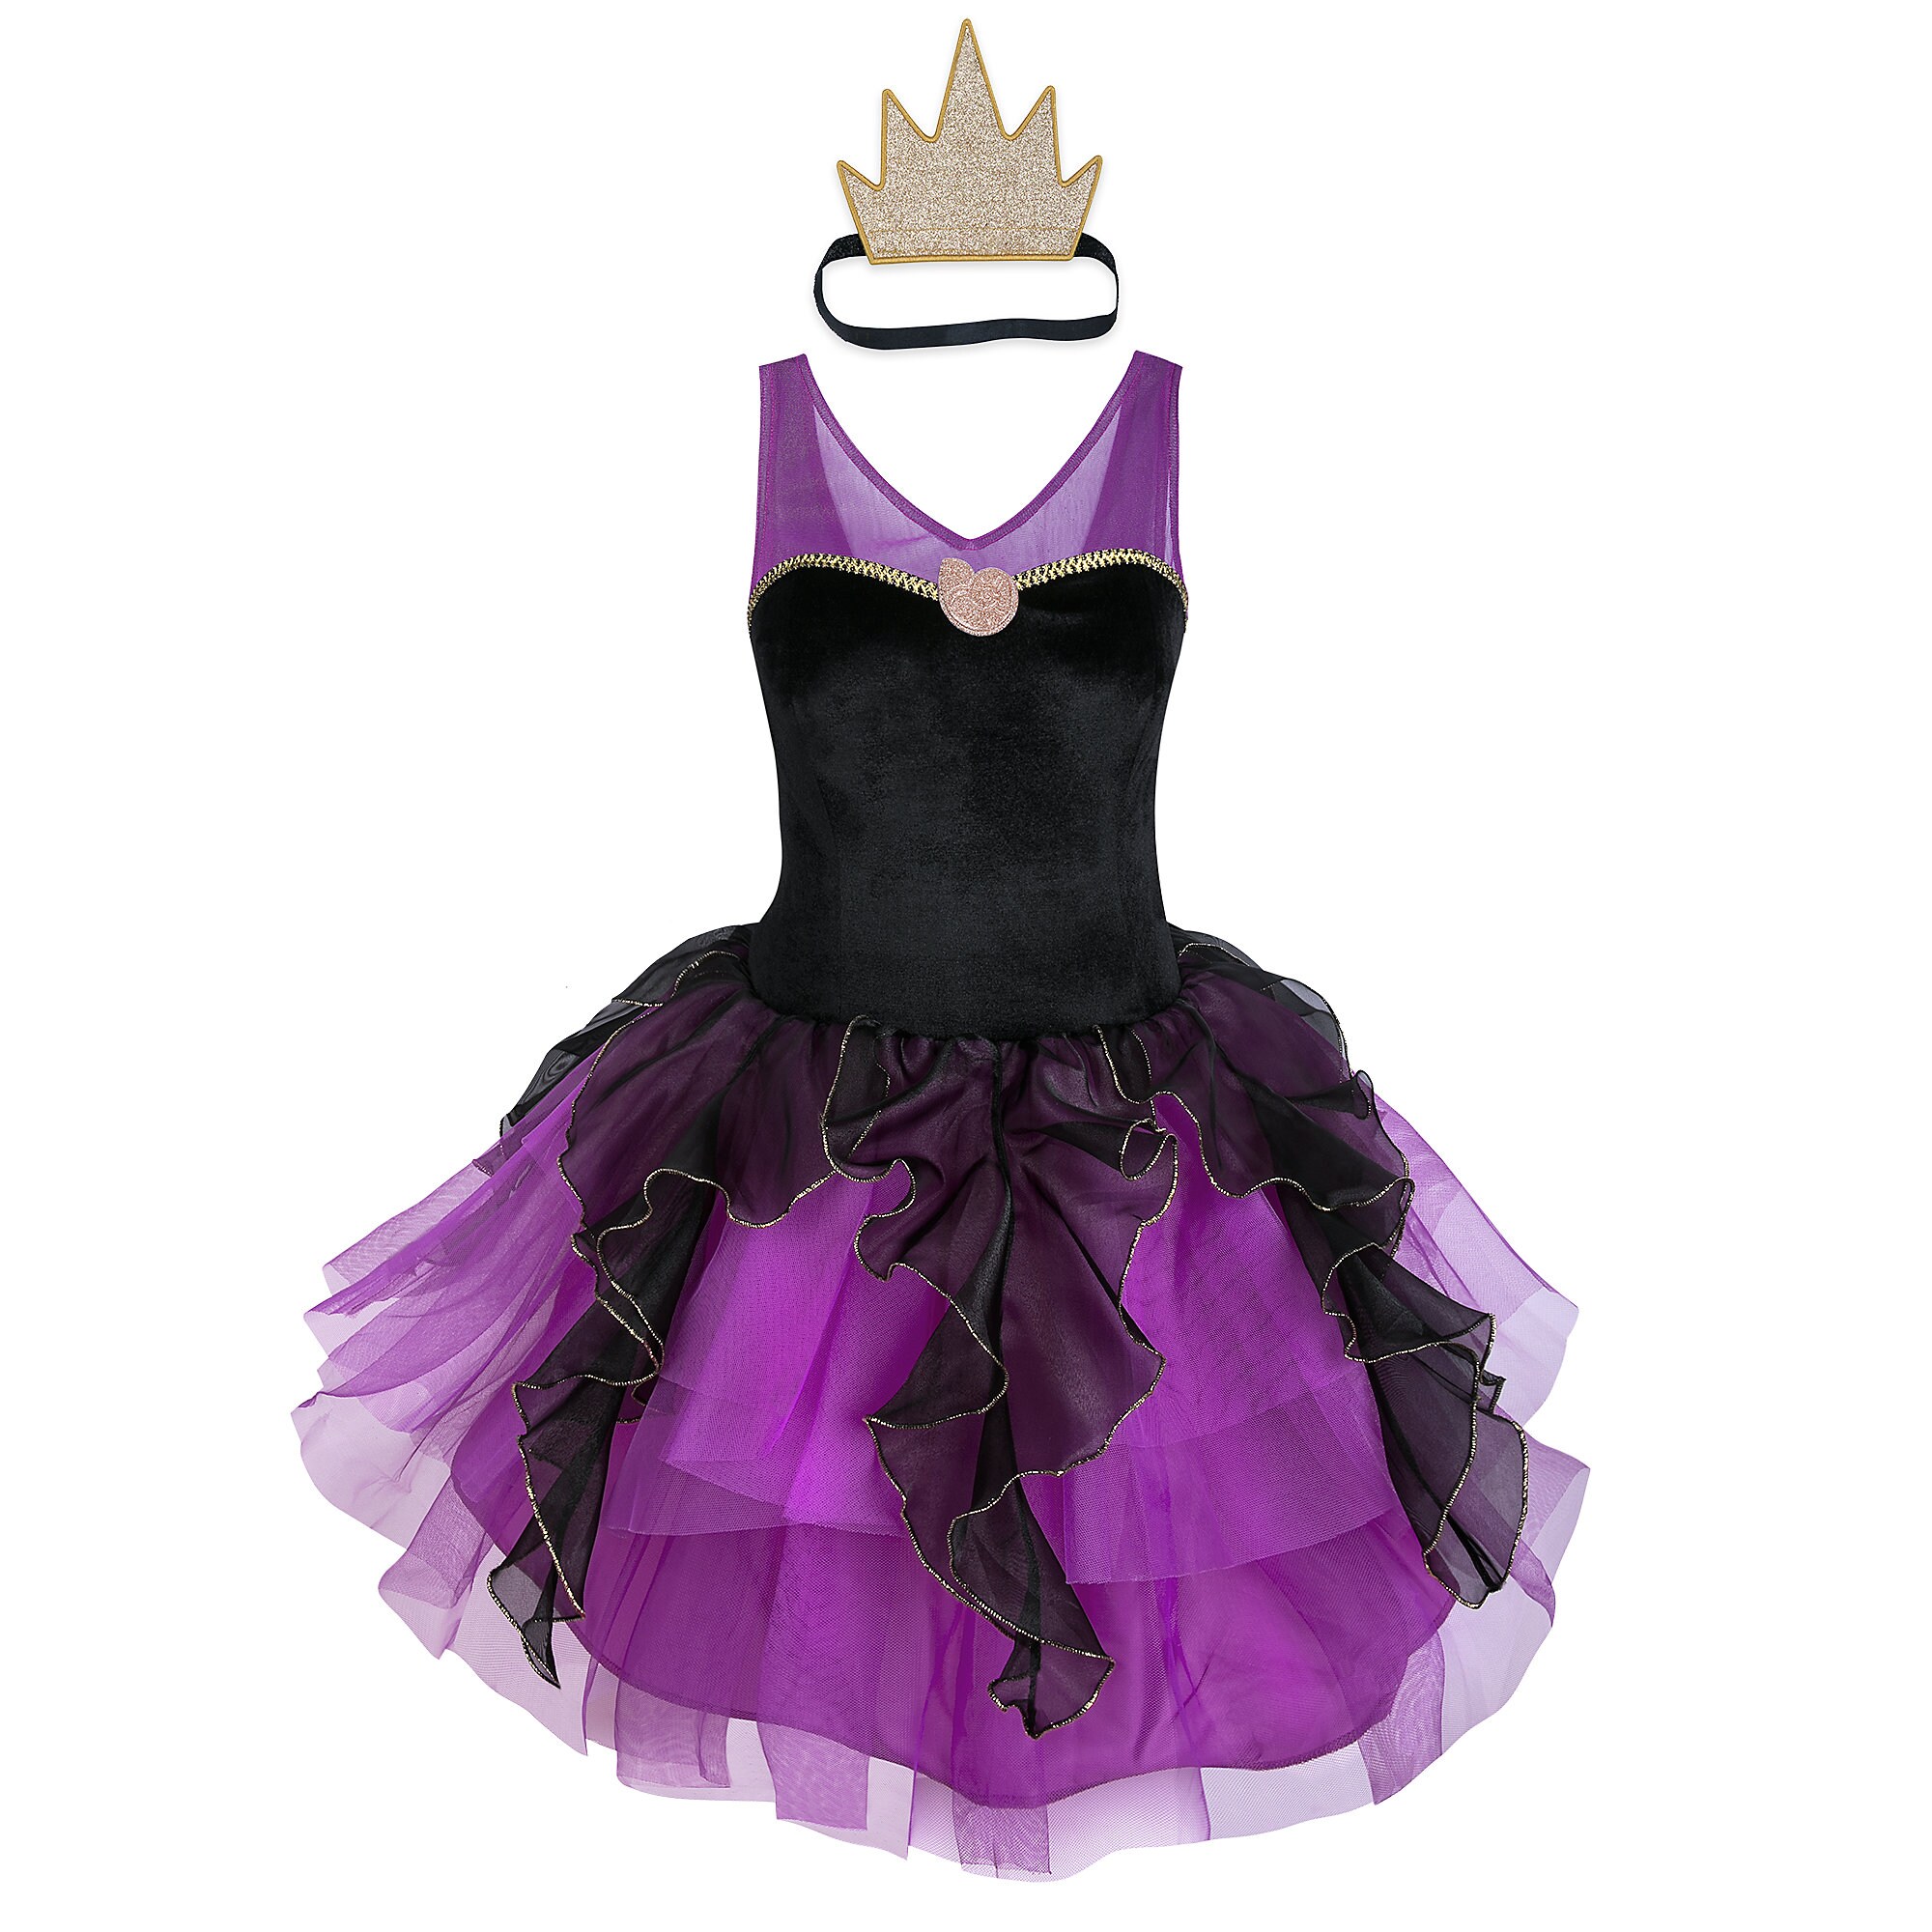 Ursula Costume with Tutu for Adults - The Little Mermaid